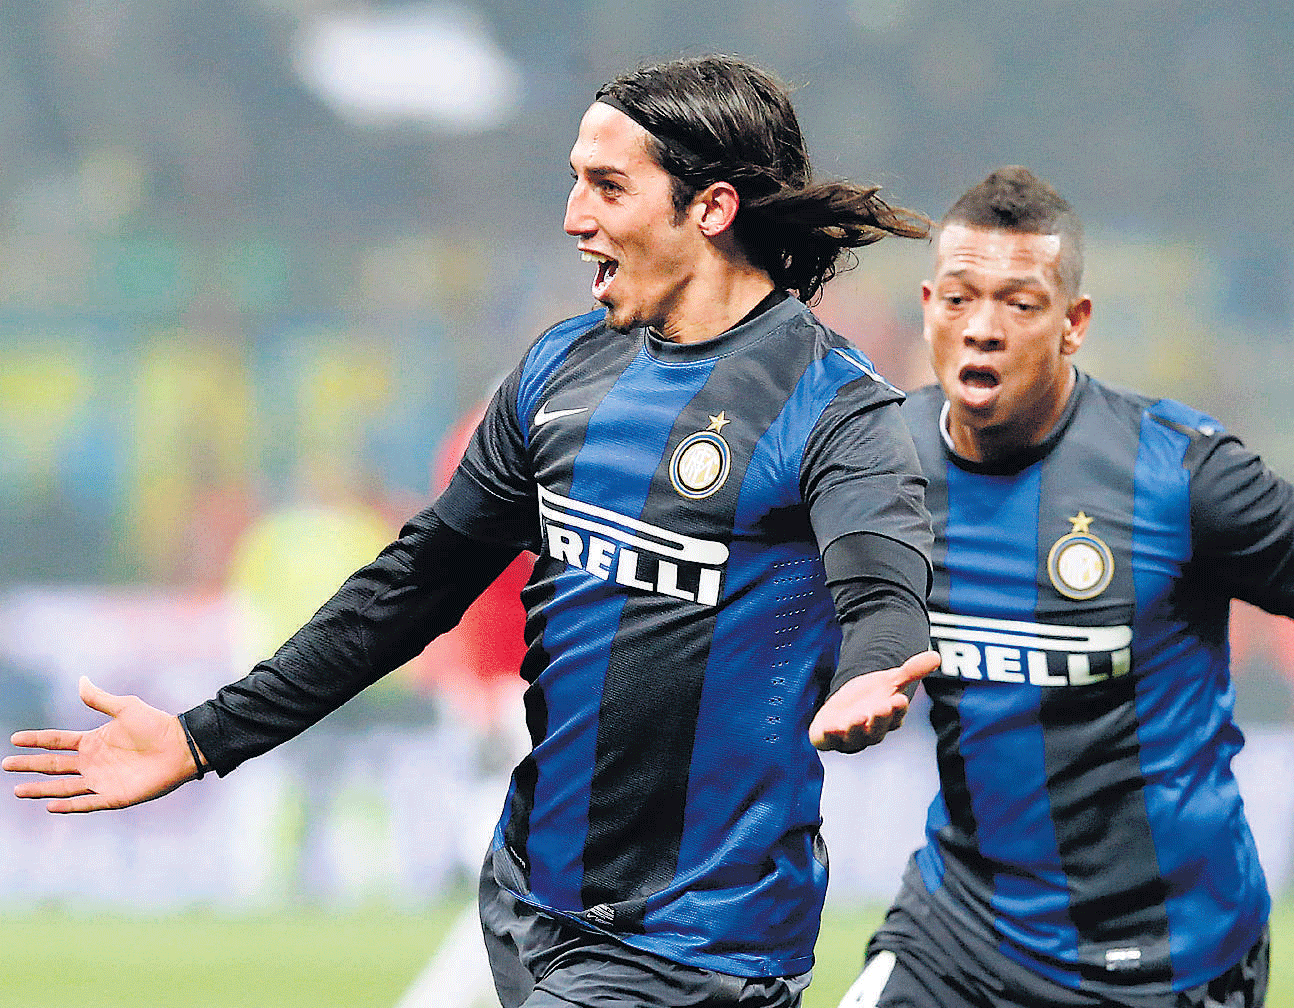 Fine finish: Inter Milans Ezequiel Schelotto exults after scoring the equaliser against arch-rivals AC Milan during their Serie A match at the San Siro on Sunday night. reuters